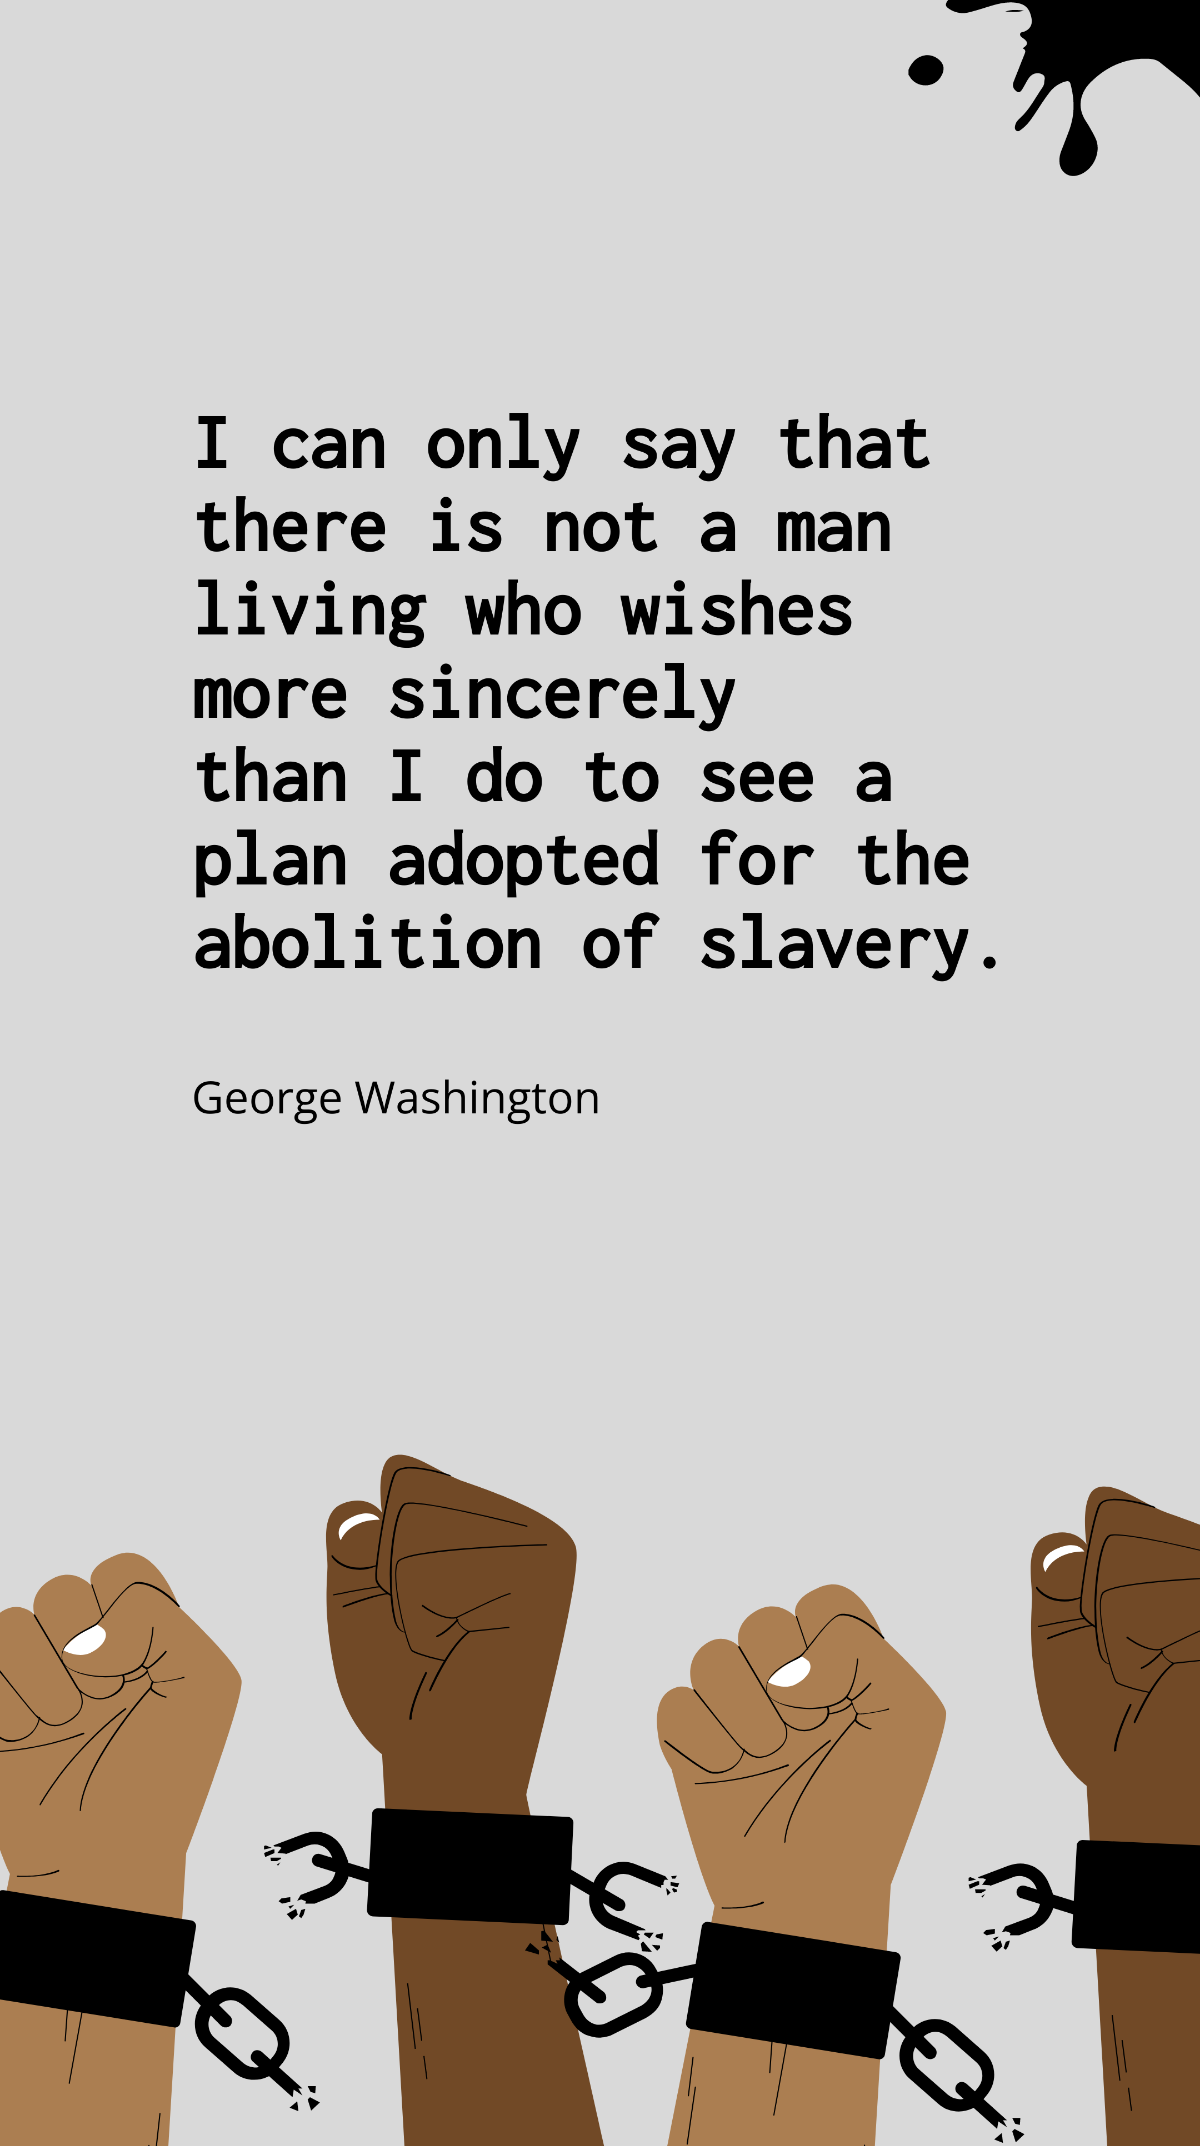 George Washington - I can only say that there is not a man living who wishes more sincerely than I do to see a plan adopted for the abolition of slavery. Template